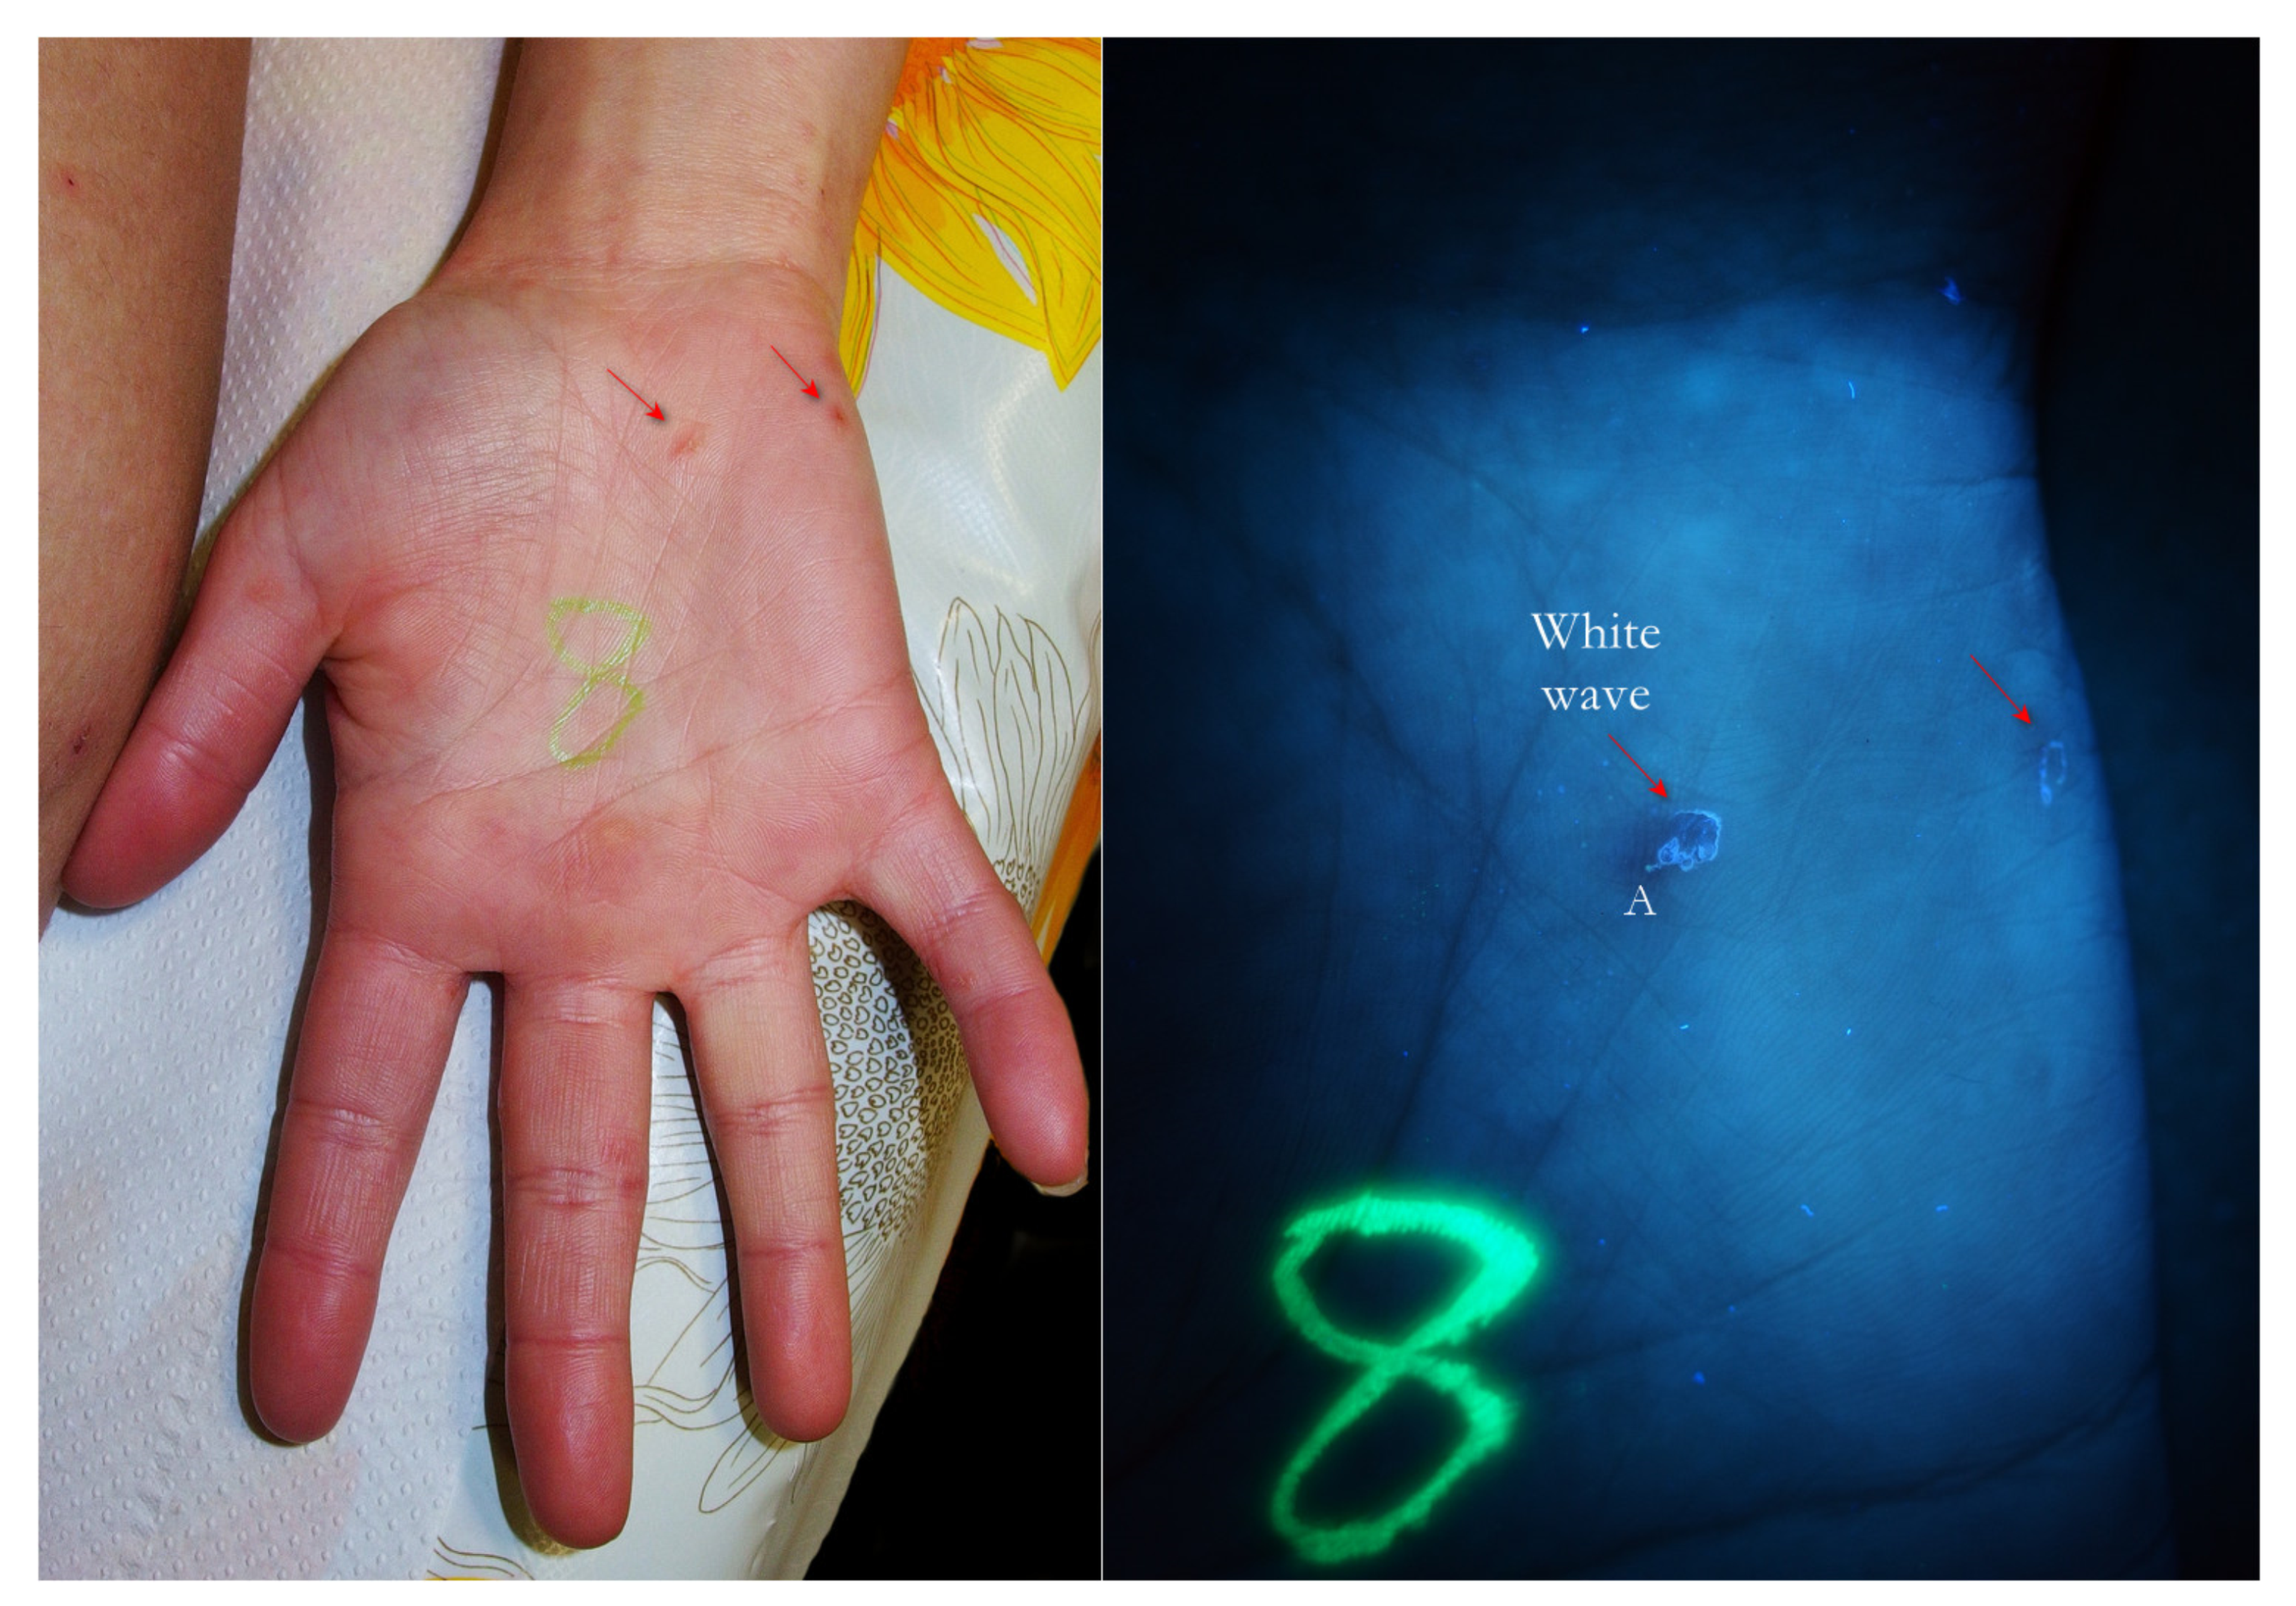 TropicalMed | Free Full-Text | in the Clinical Diagnosis Human Scabies through the Use of Ultraviolet Light (UV-Scab Scanning): Case-Series Study